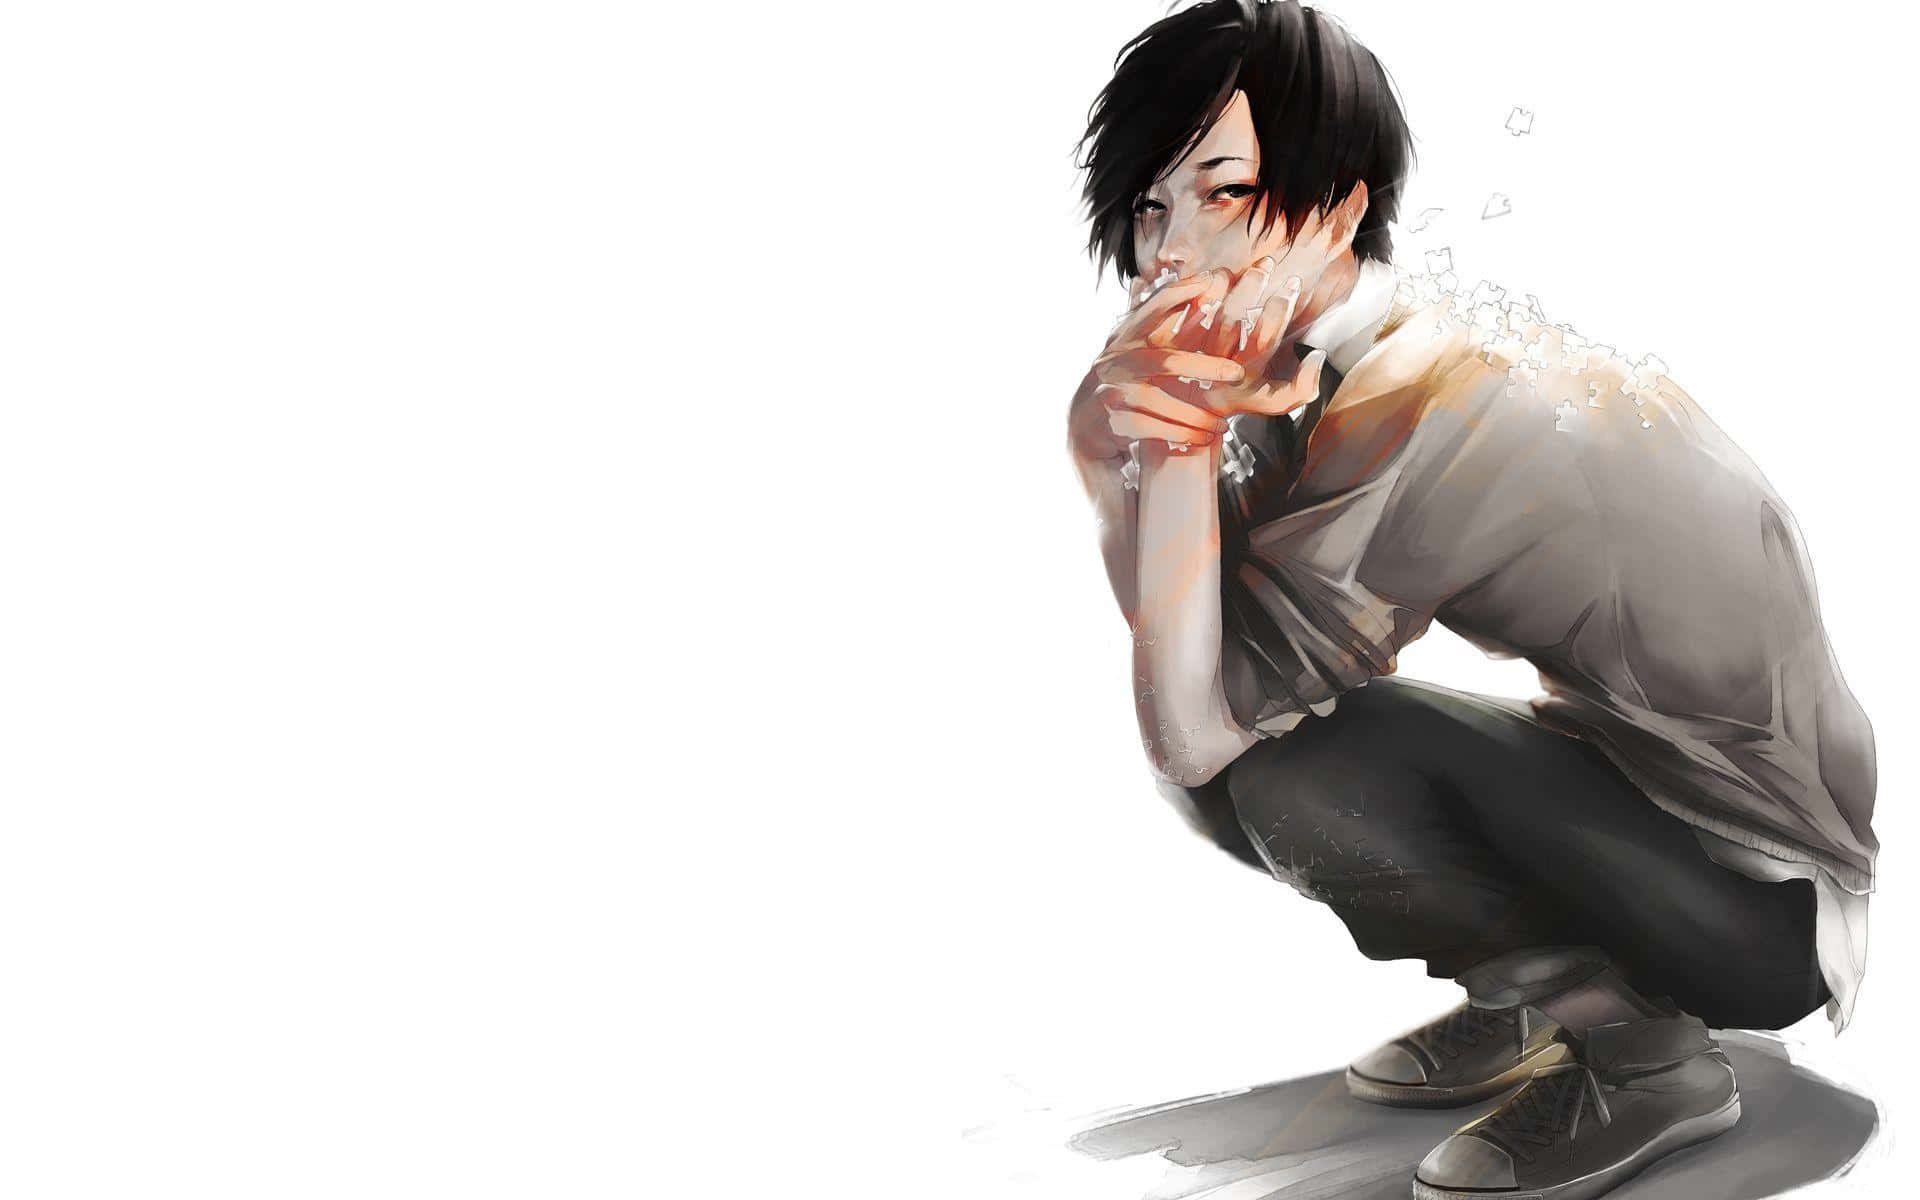 A reflective Emo Anime Boy looks into the distance Wallpaper